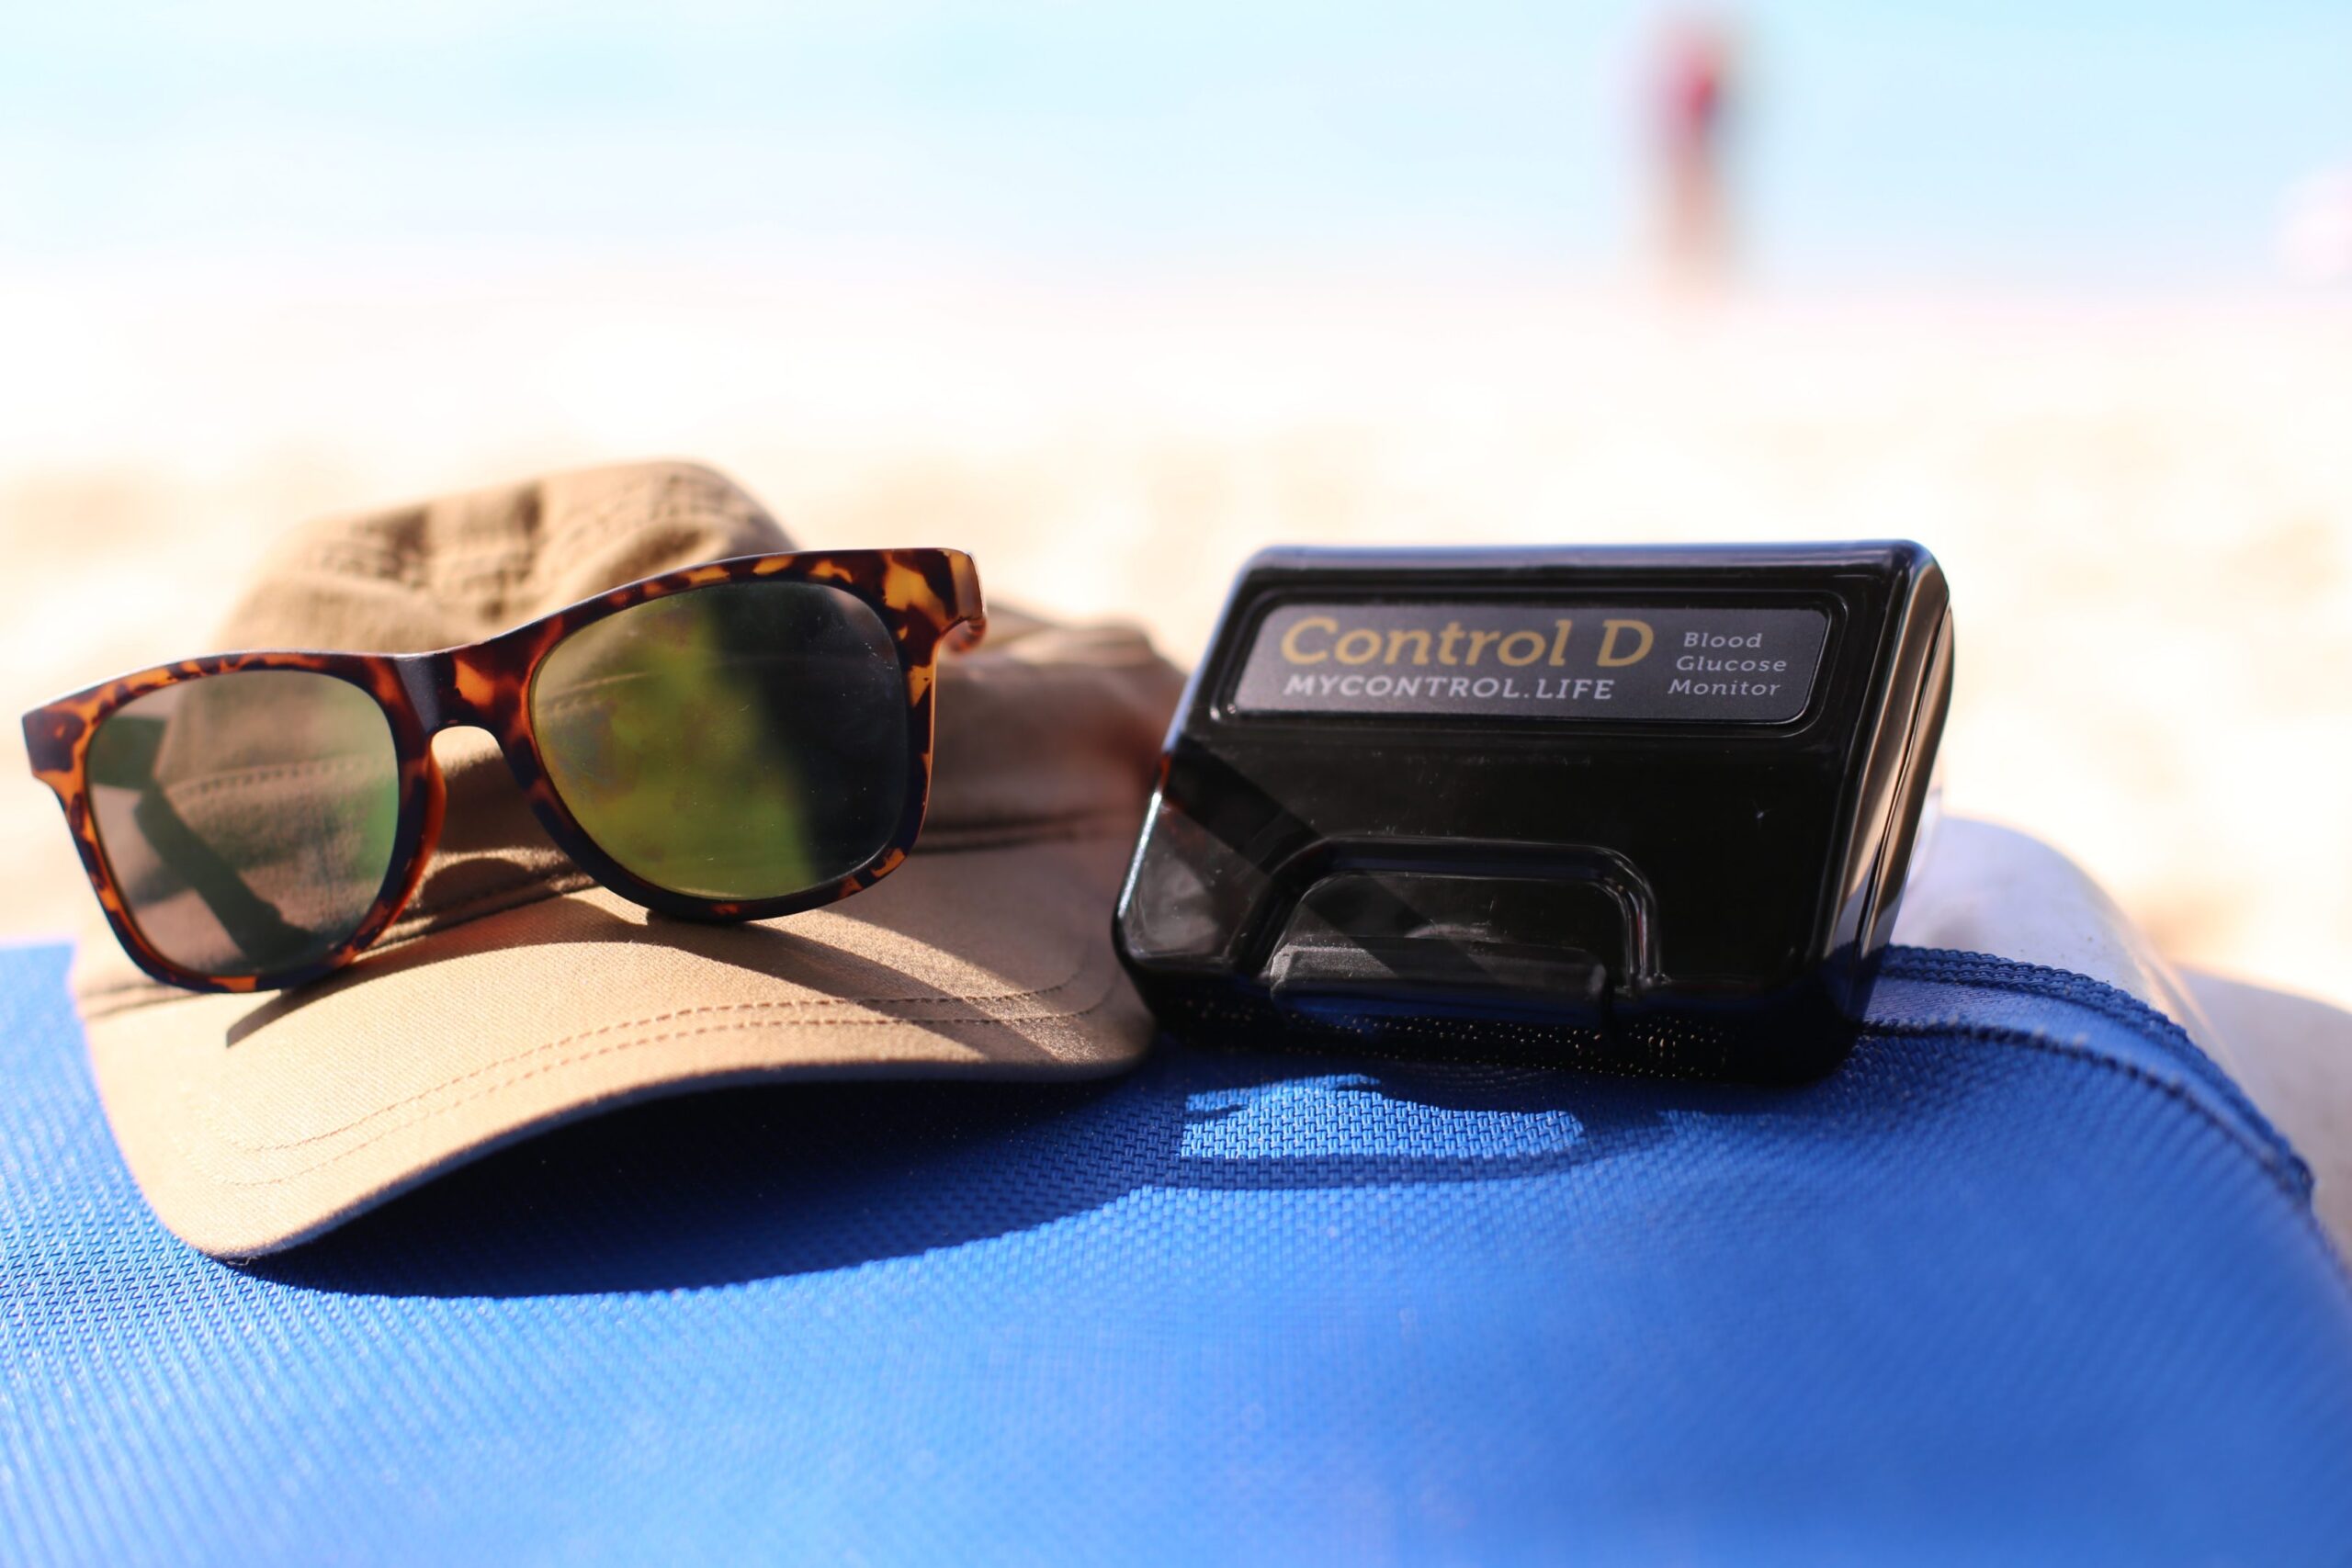 Control D Blood Glucose Monitor on the beach with hat and sunglasses